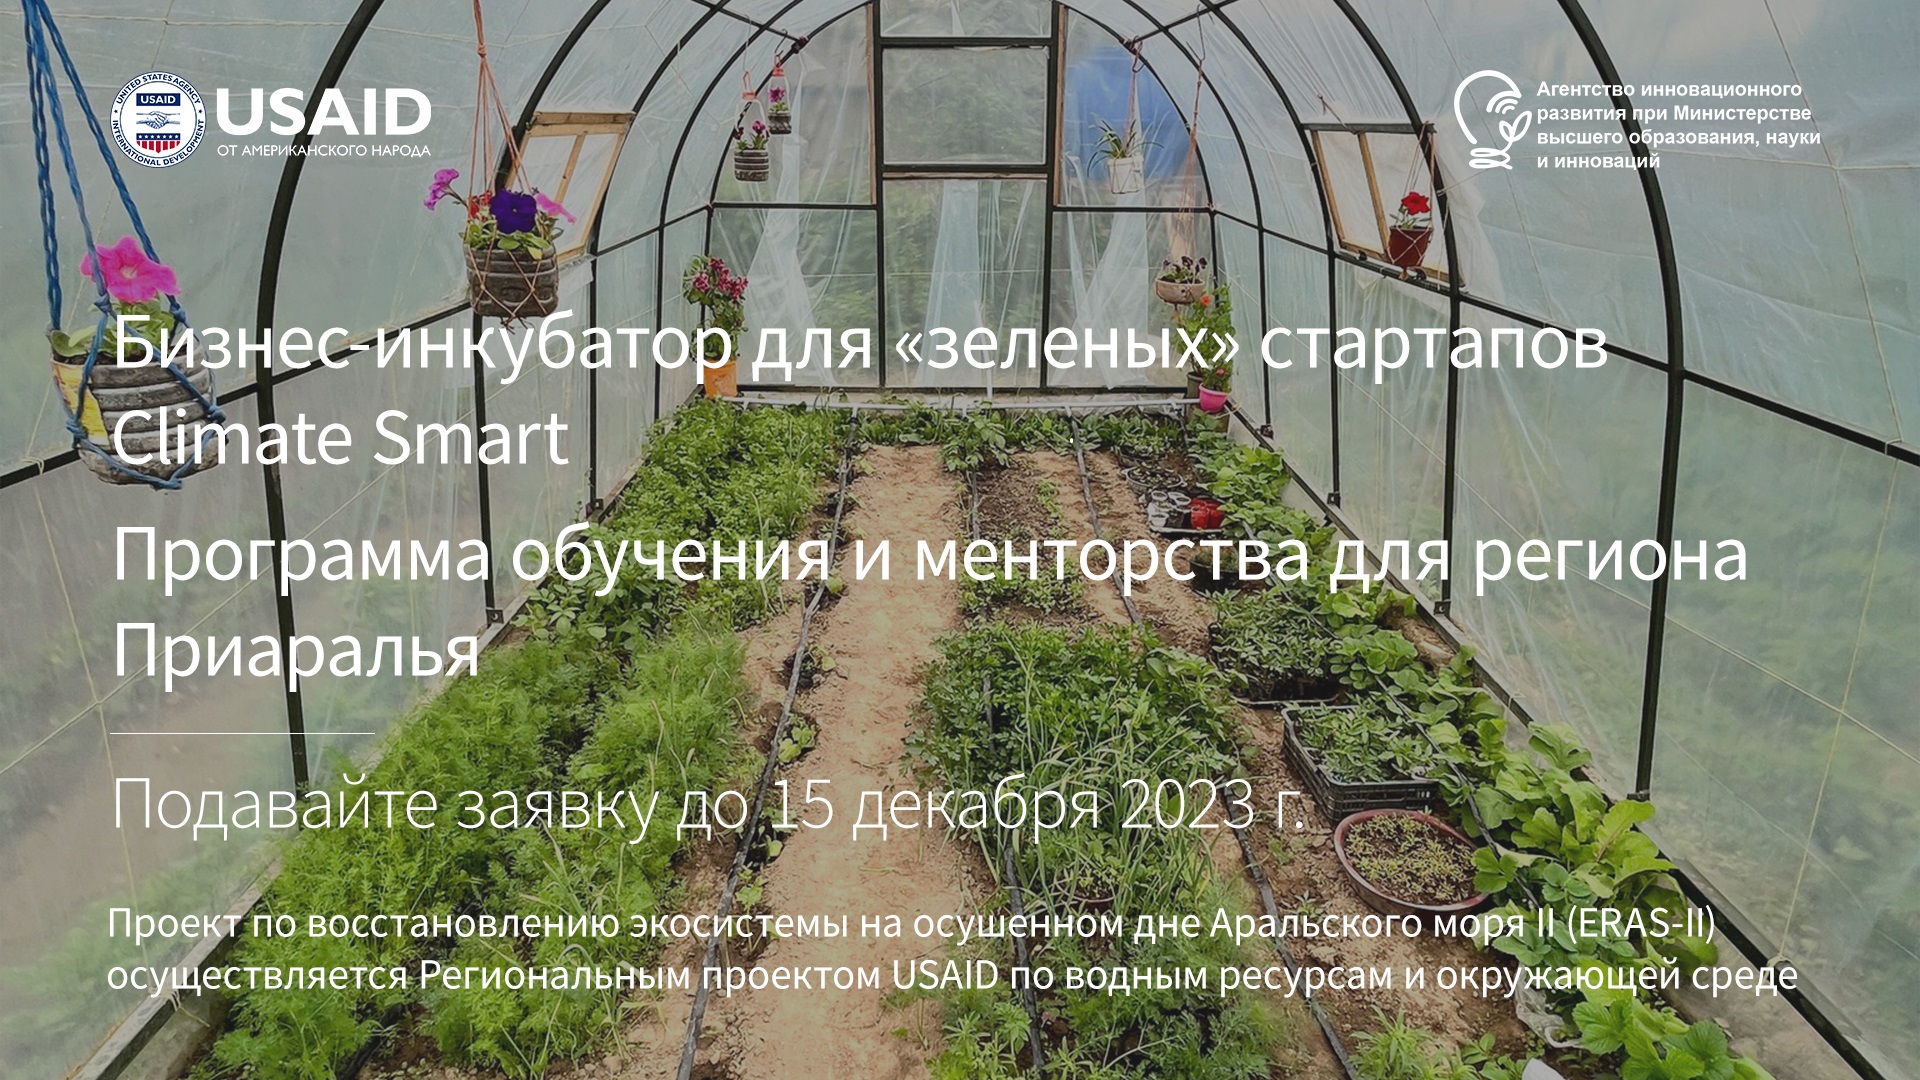 USAID Environmental Restoration of the Aral Sea II Activity (ERAS-II) kindly reminds startups from Uzbekistan to apply for the Climate Smart Business Incubation Program